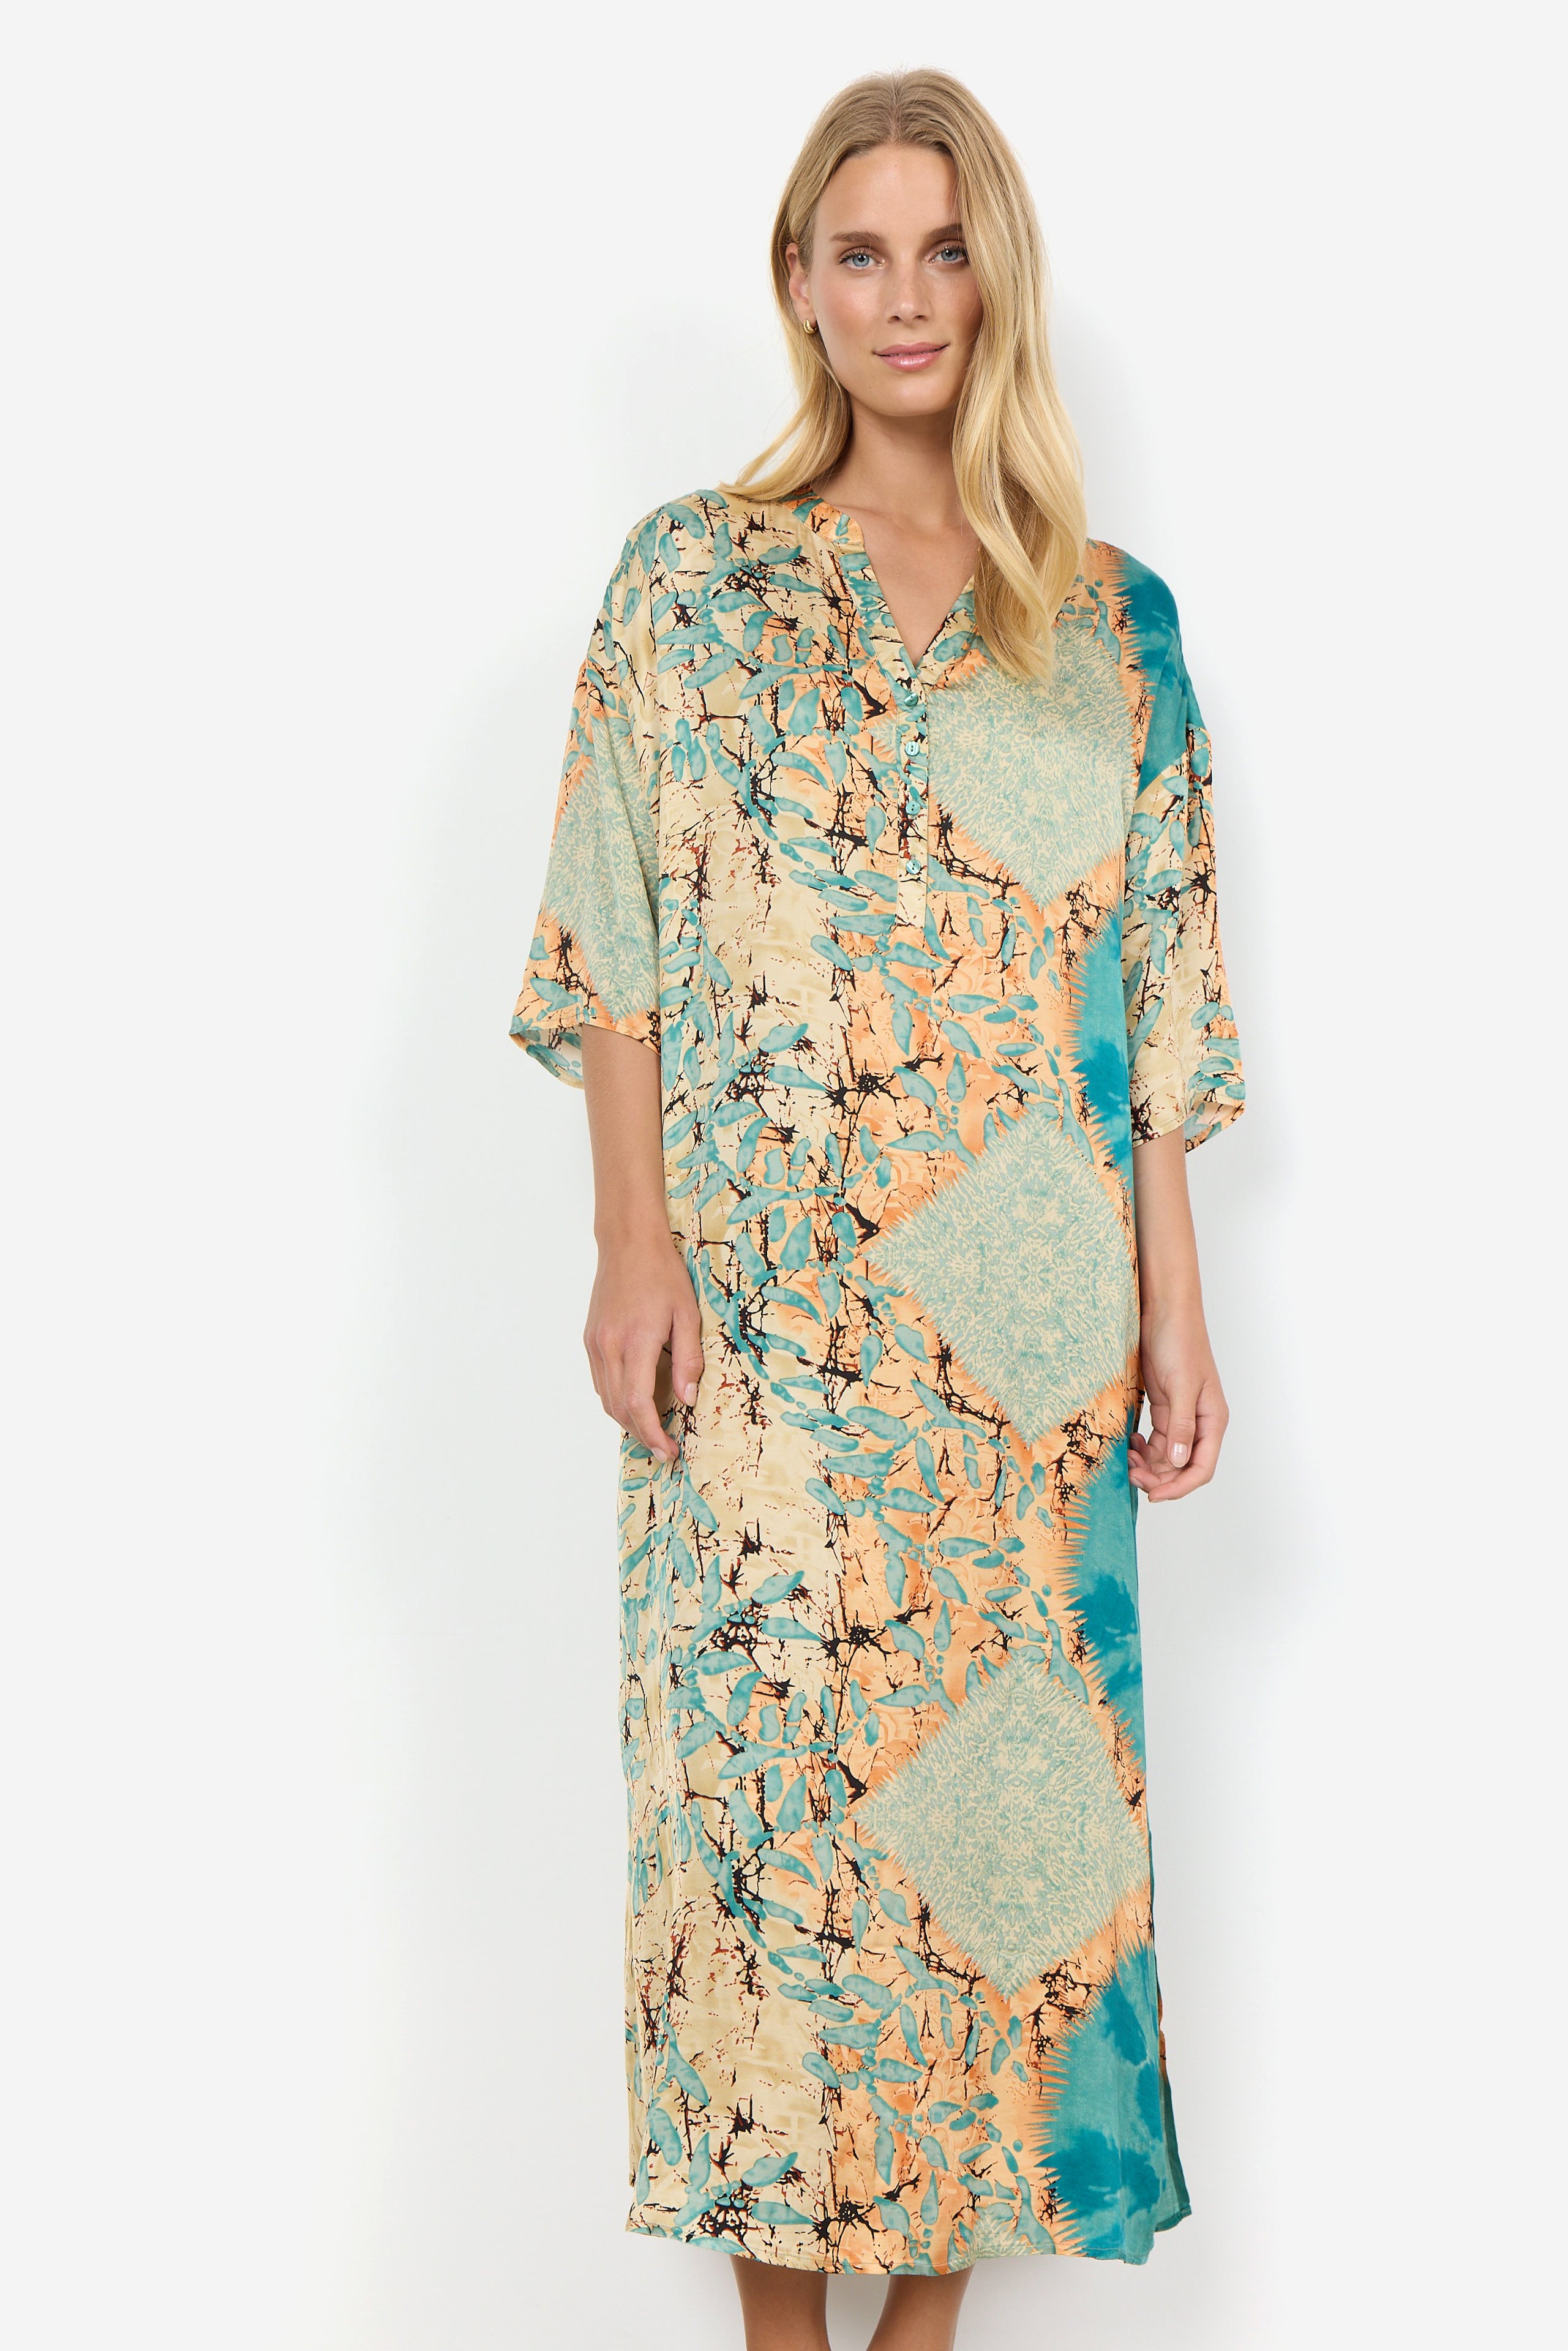 Emly Dress in Teal